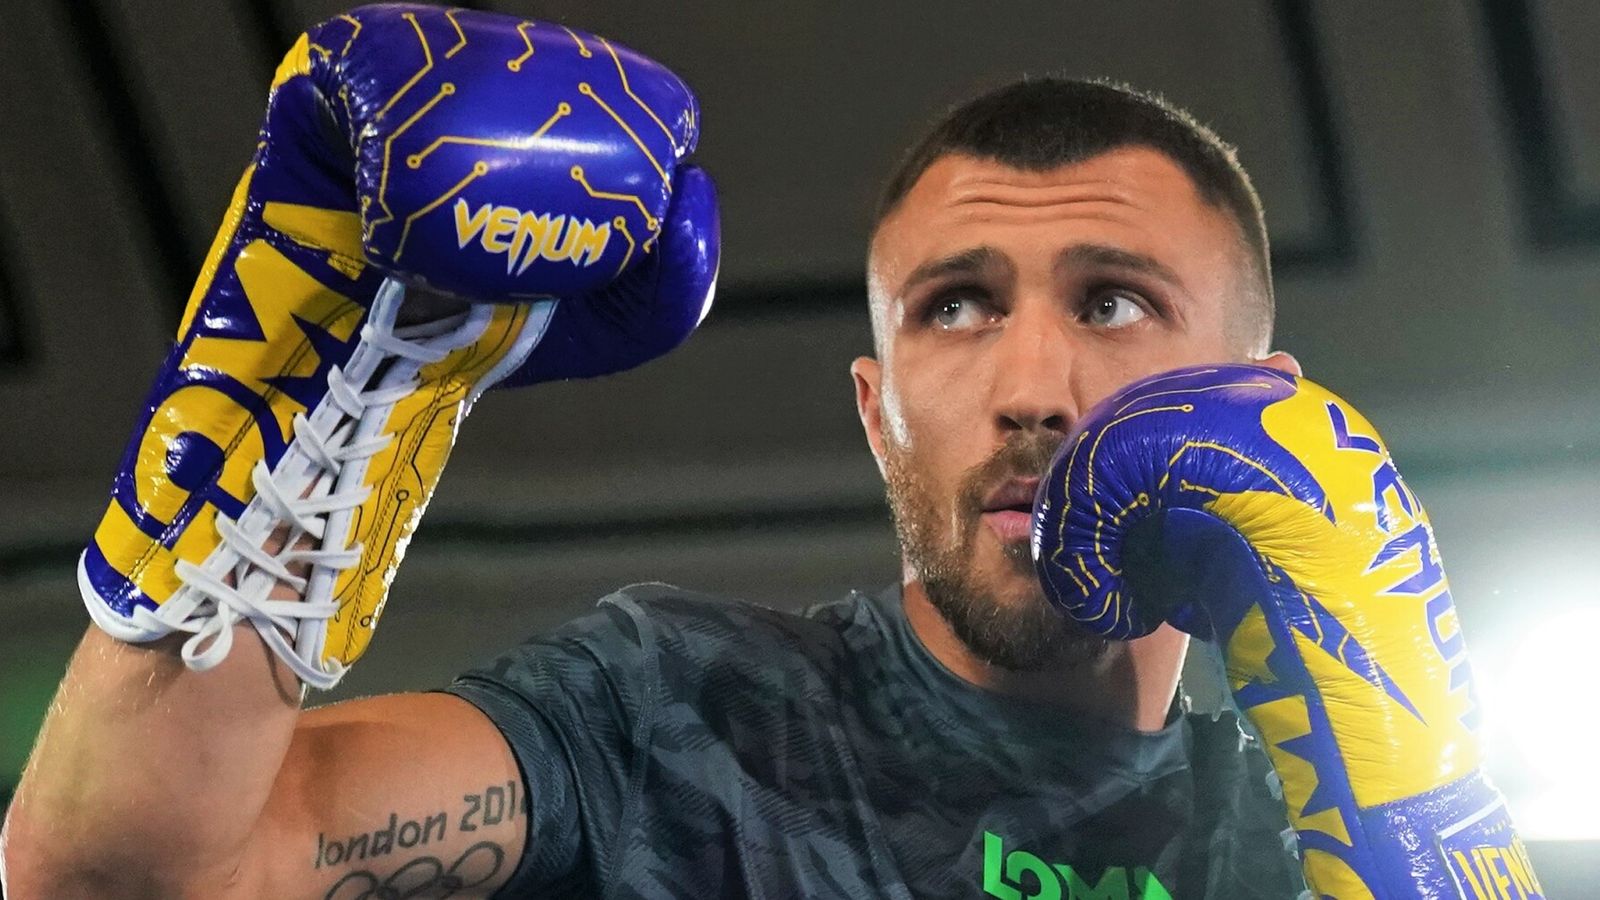 Vasiliy Lomachenko returns as lightweight division changes with George Kambosos Jr’s win over Teofimo Lopez – can he reign as No 1 again?